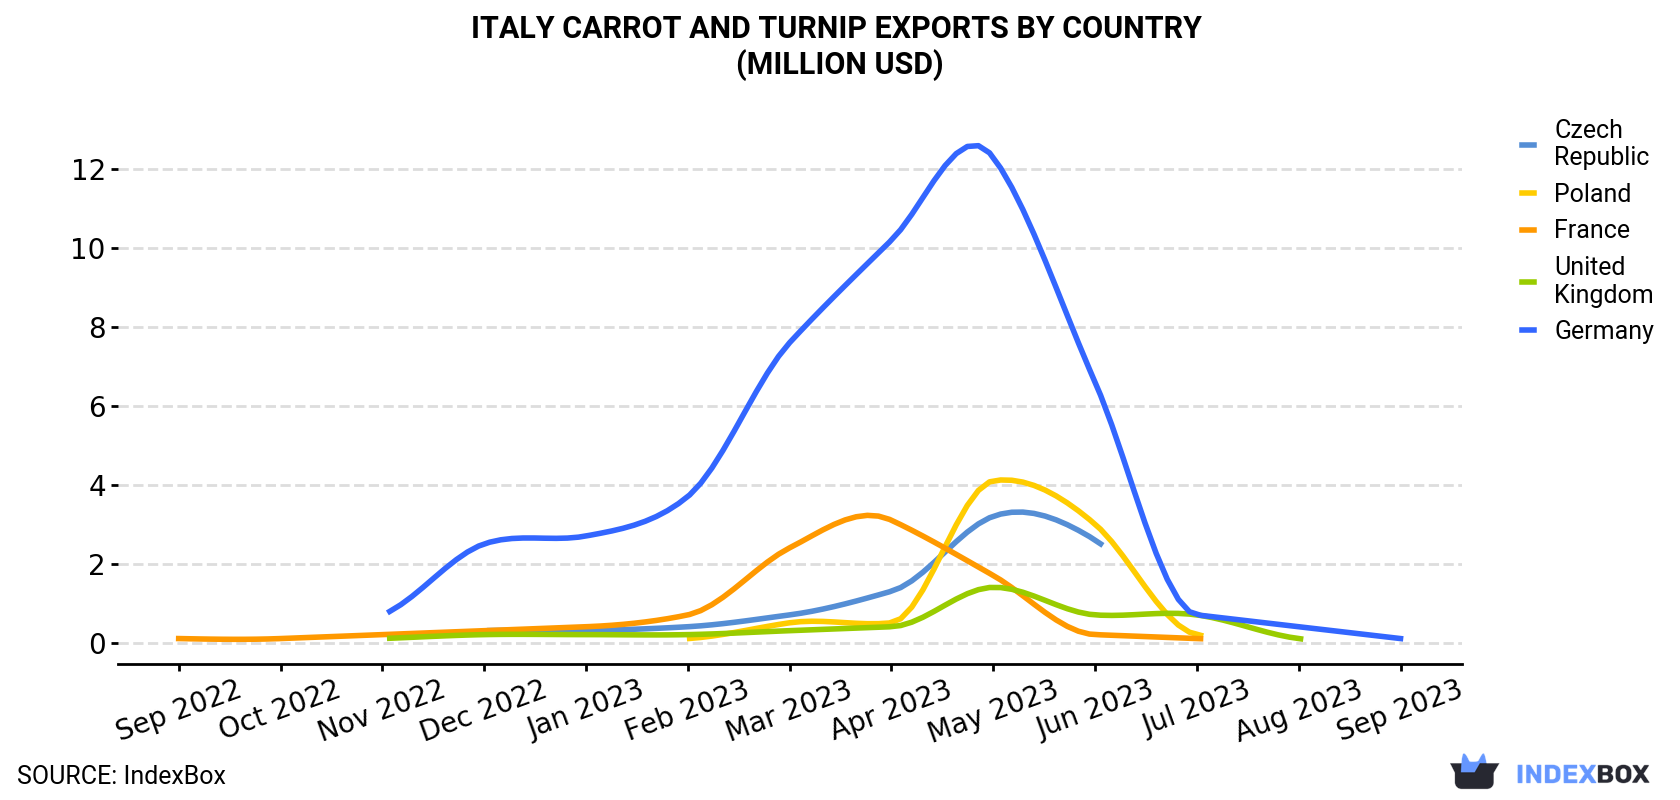 Italy Carrot And Turnip Exports By Country (Million USD)